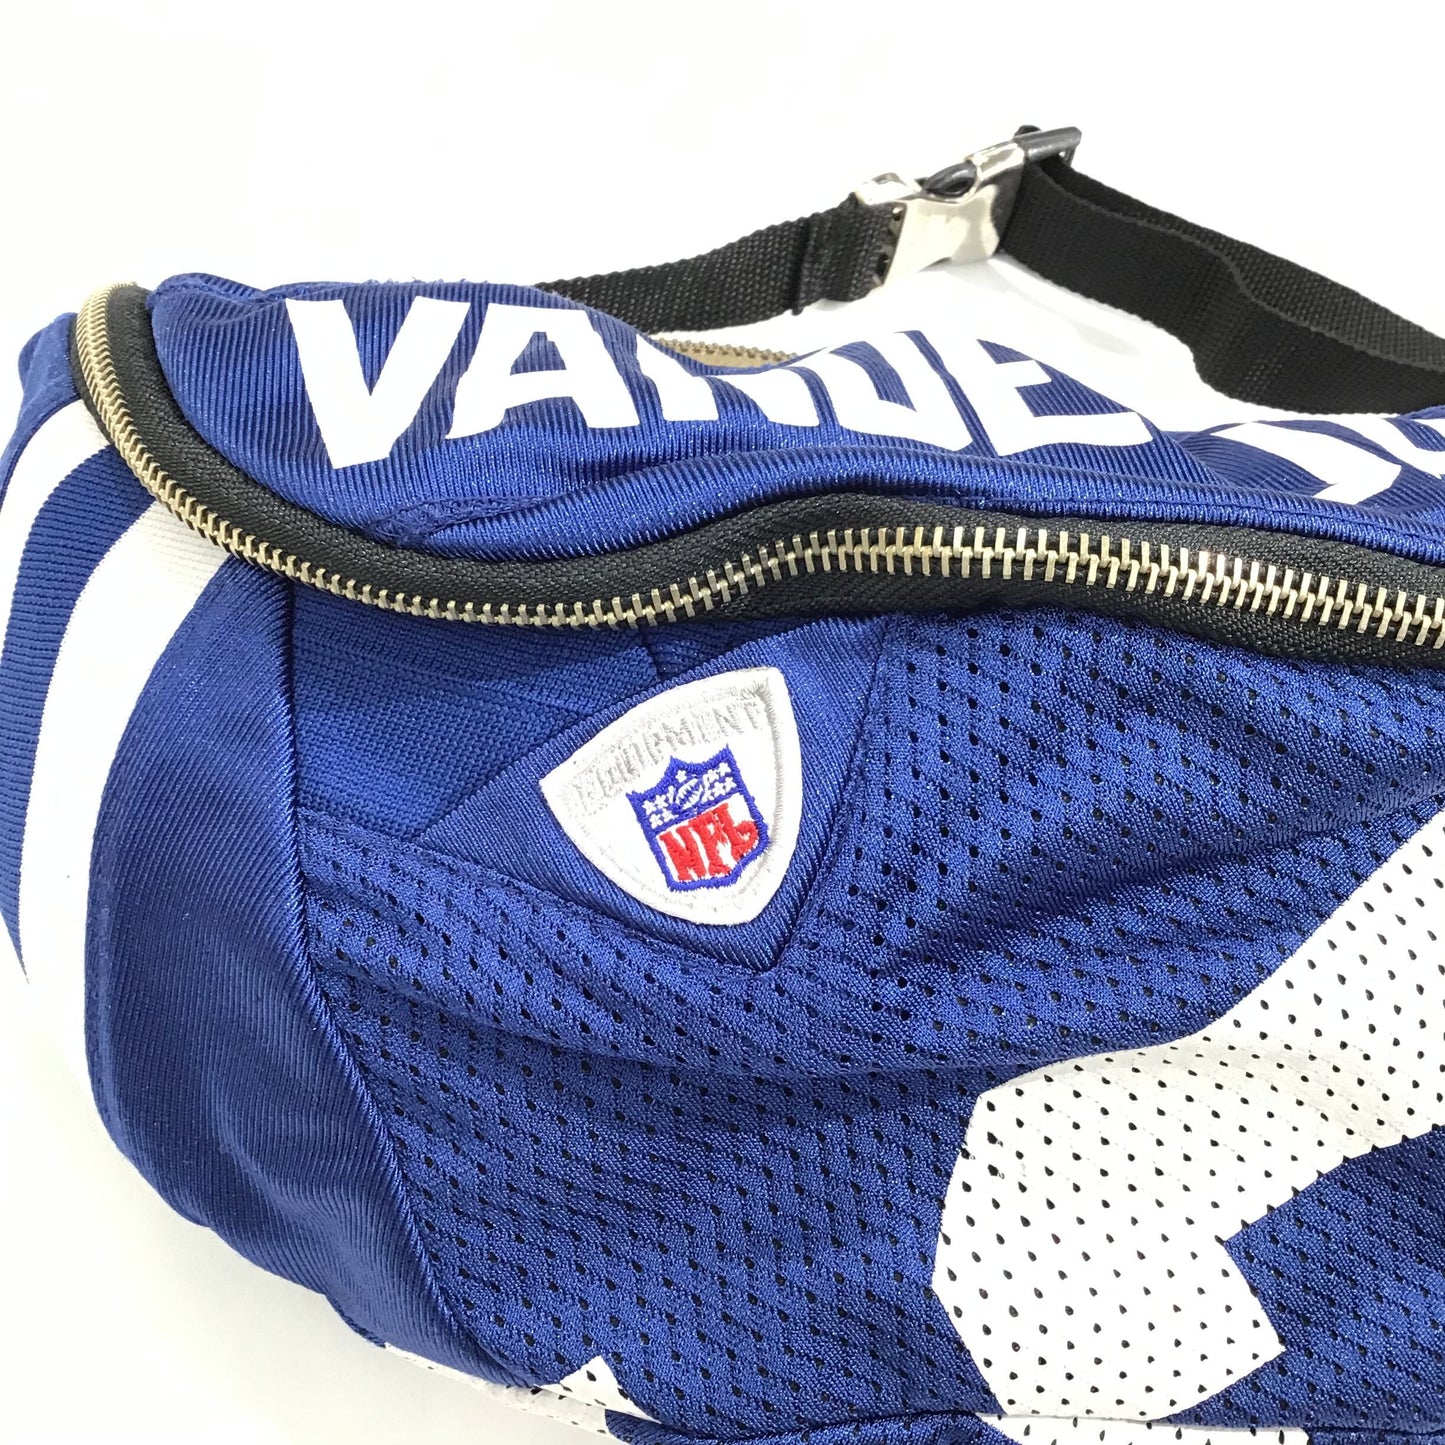 NFL Team Dallas Cowboys "VANDERJAGT" Amekaji Japanese Vintage Handmade Custom One and Only One Cote Mer Upcycle Sustainable Upscale Street Fashion Embroidered Remake Deconstructed Shirts Waist Bag